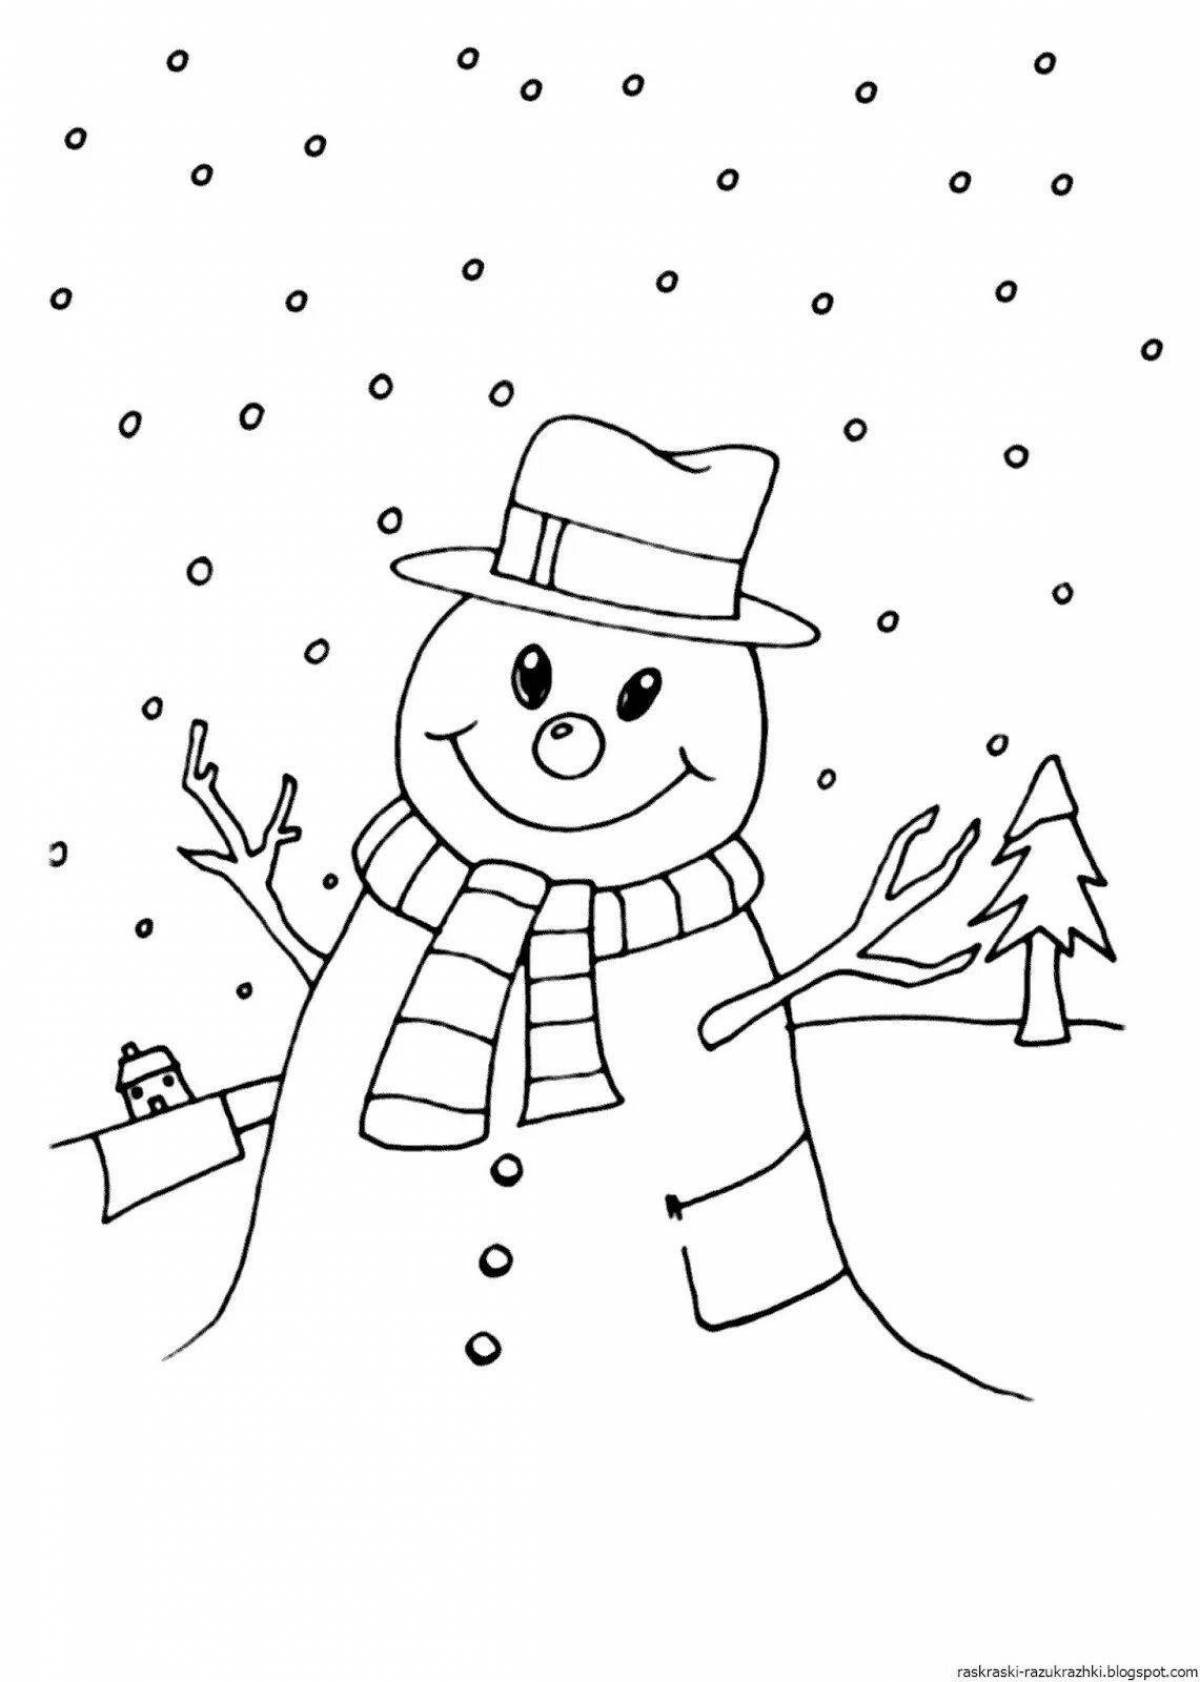 Coloring day snowman